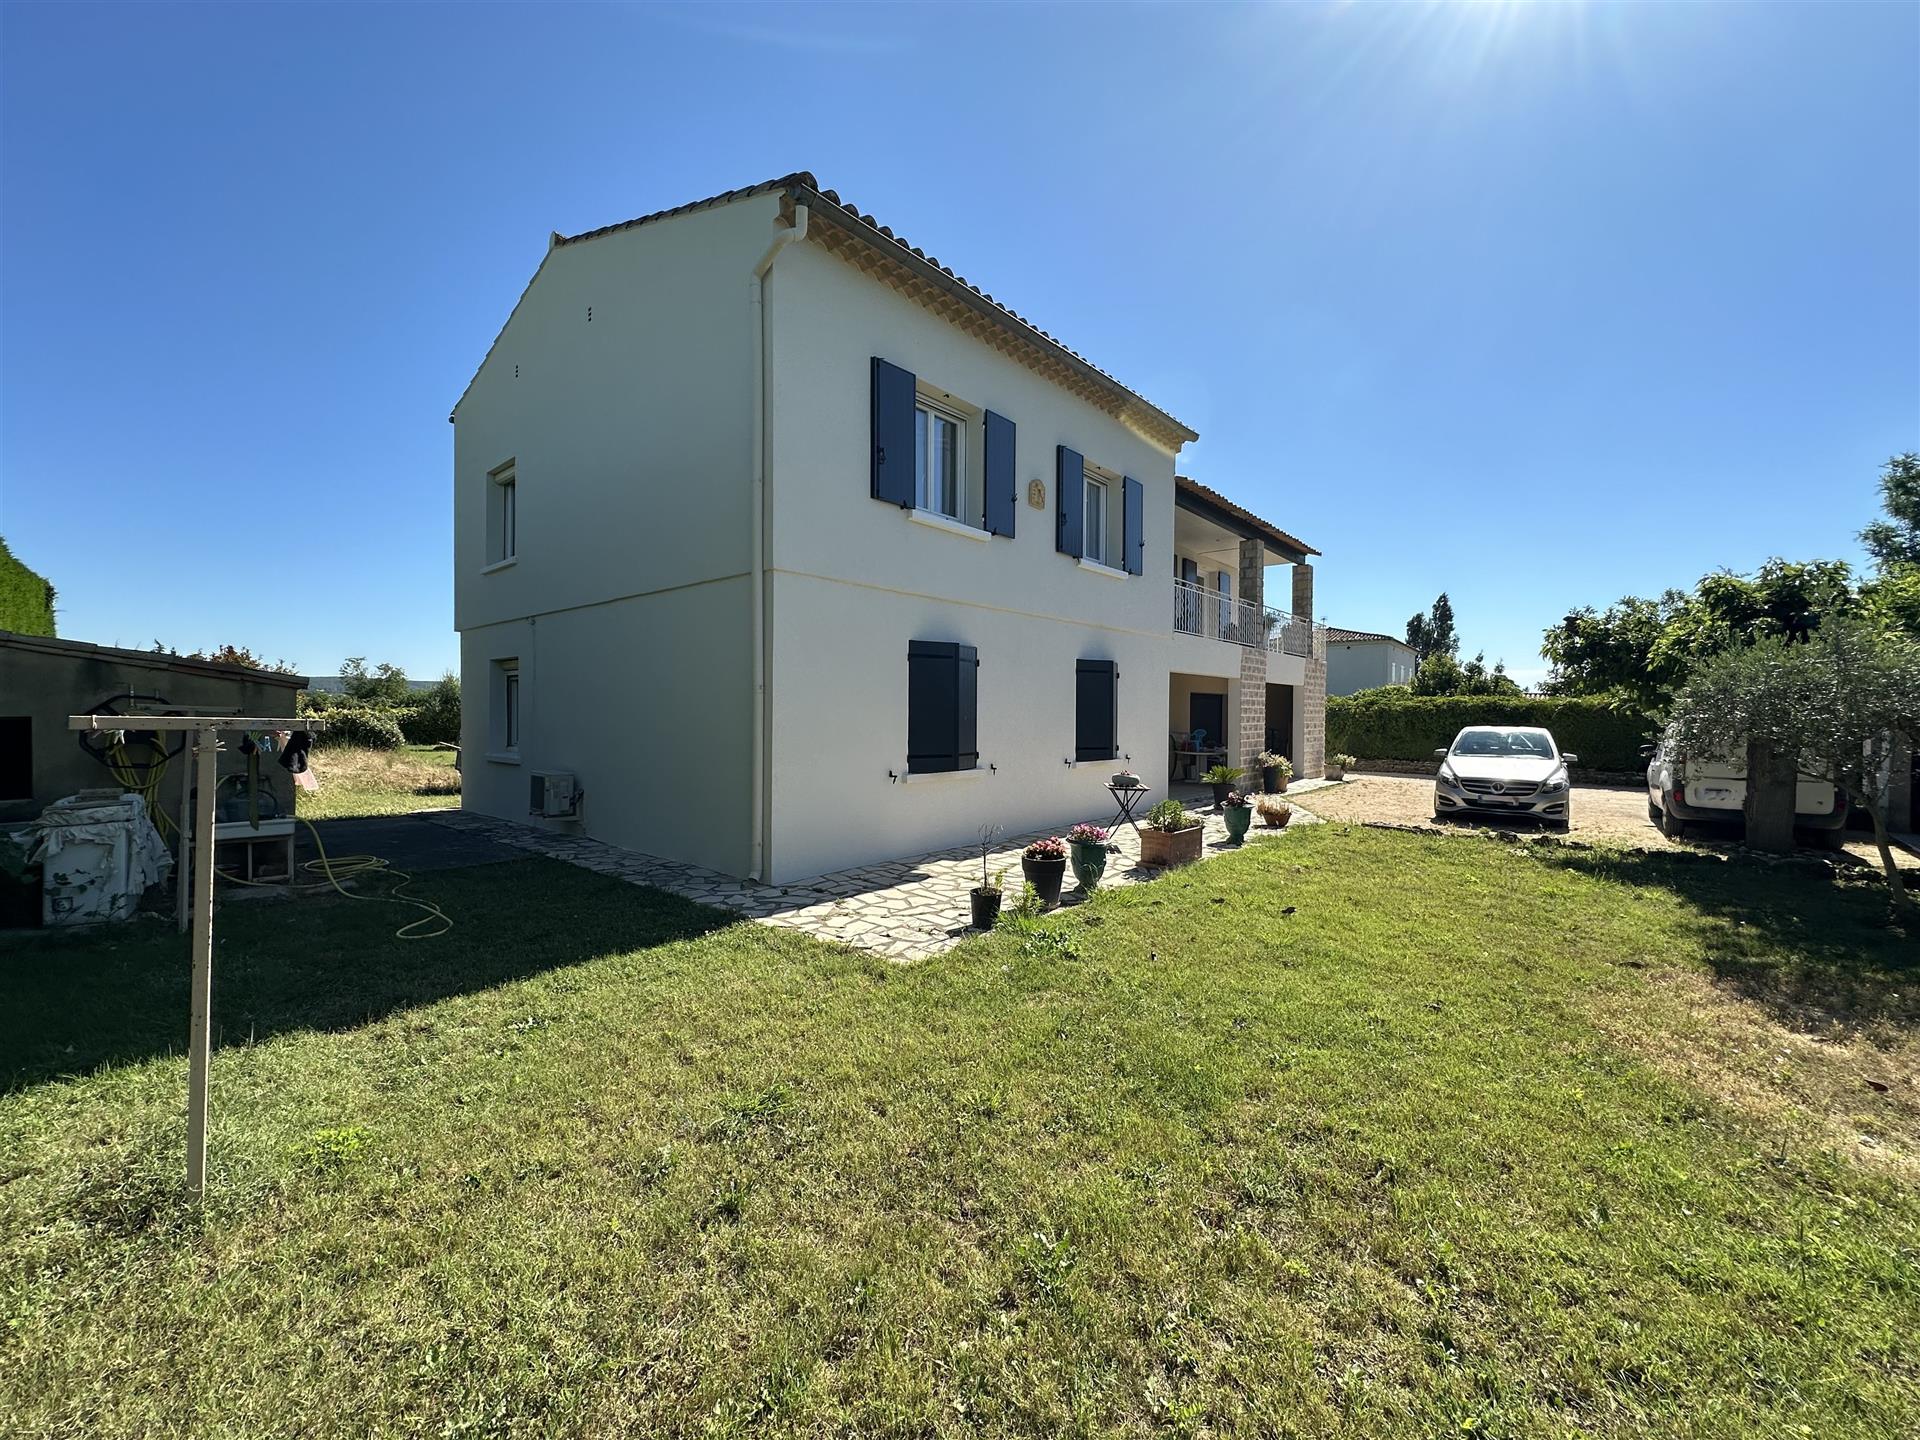 3 km from Uzès. House of 200 m² composed of 2 dwellings. Land 1 200 m². Garage 50 m². 